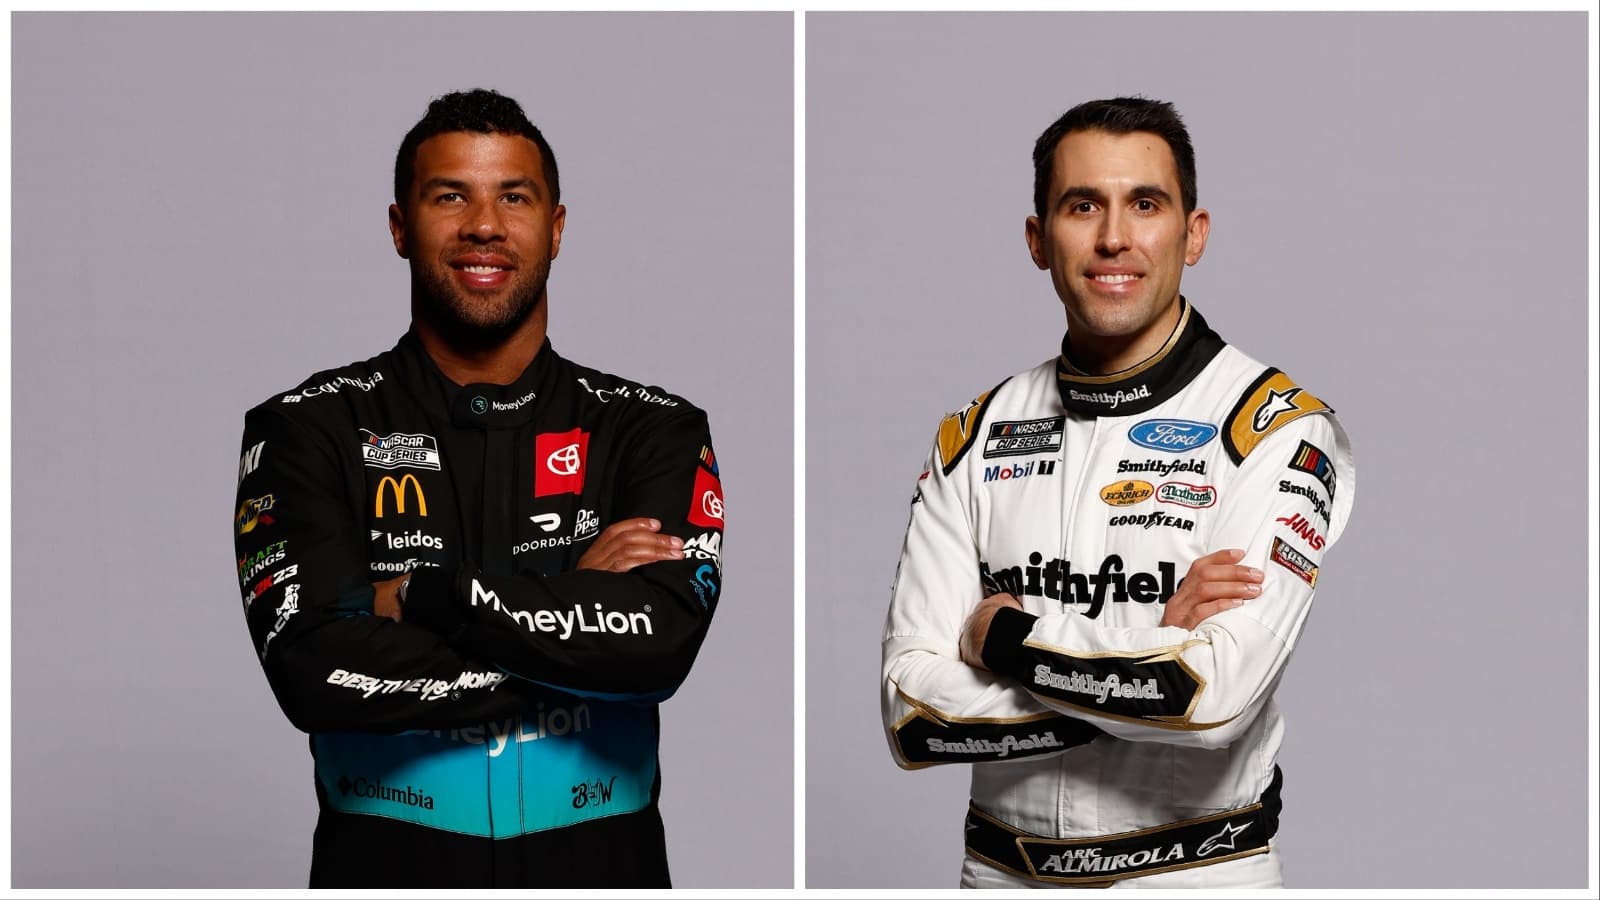 The Aric Almirola Dust-Up With Bubba Wallace May Have Its Roots in a Long-Ago Silly Season Move